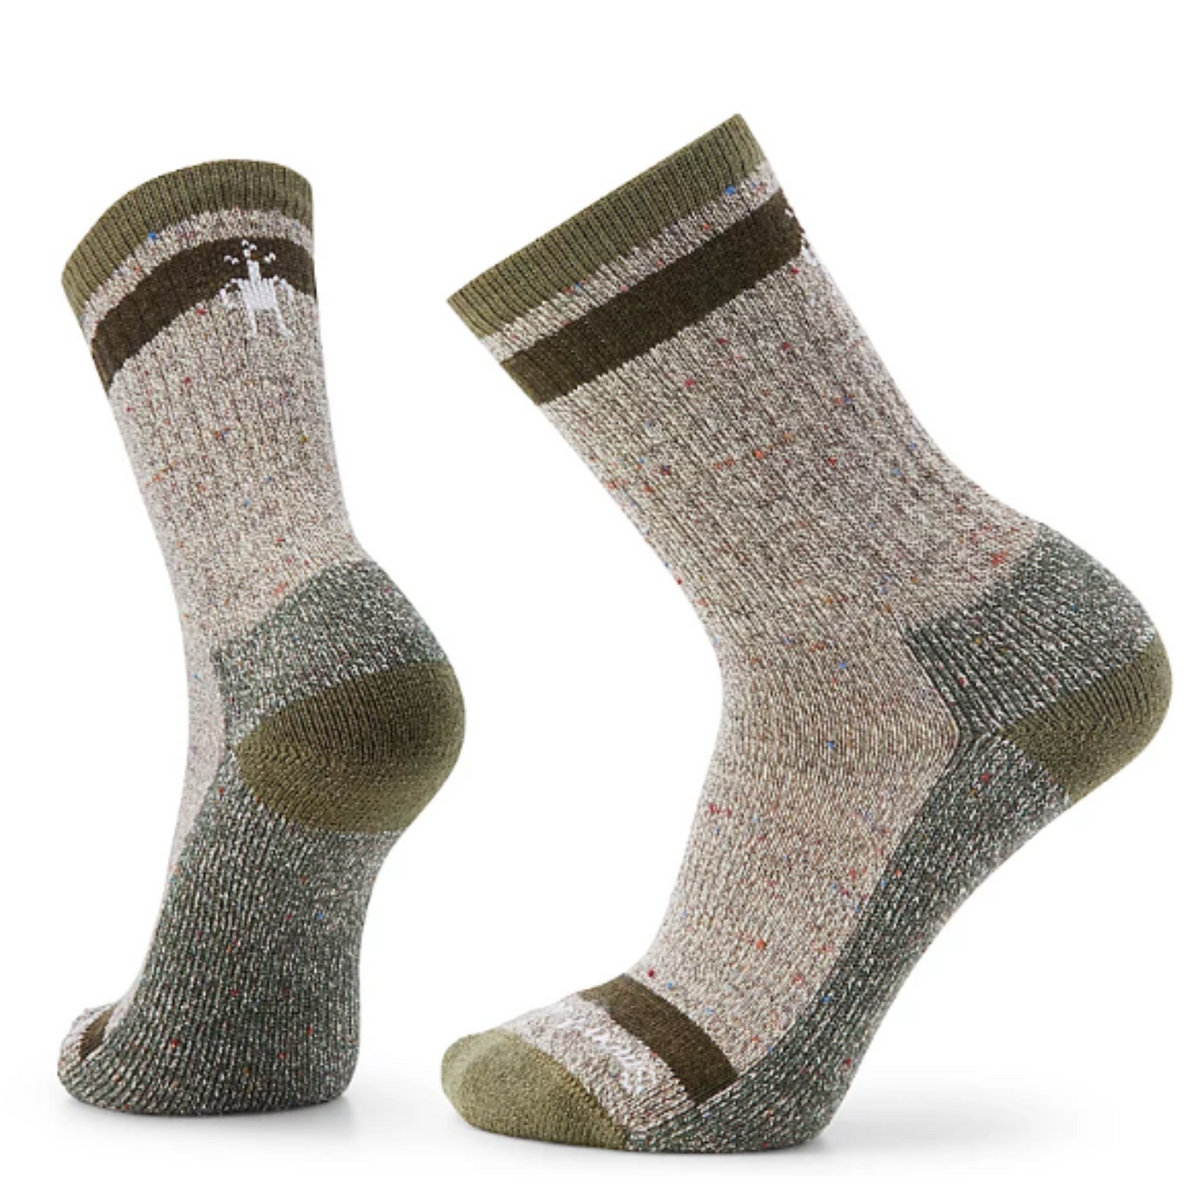 Winter Moss Smartwool Larimer Crew men&#39;s sock featuring gray sock with moss green and brown bands around top. Moss green cuff, heel, and toe. Shown on display feet. 